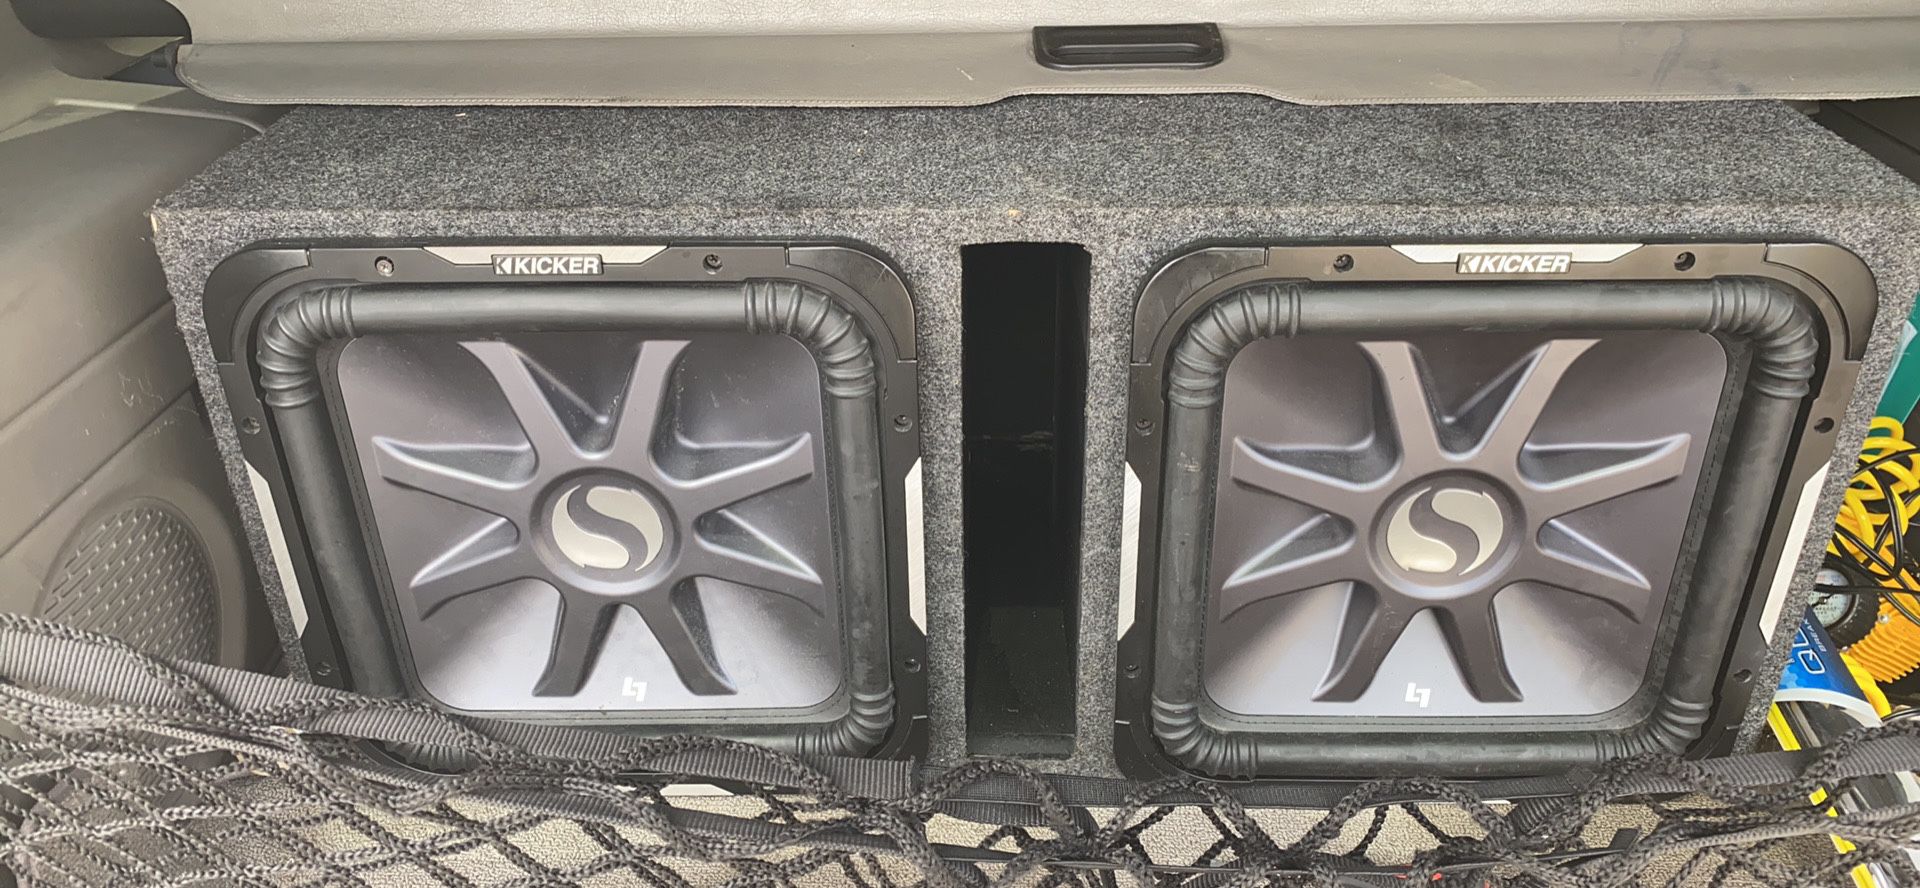 Two kickers 15” subwoofers